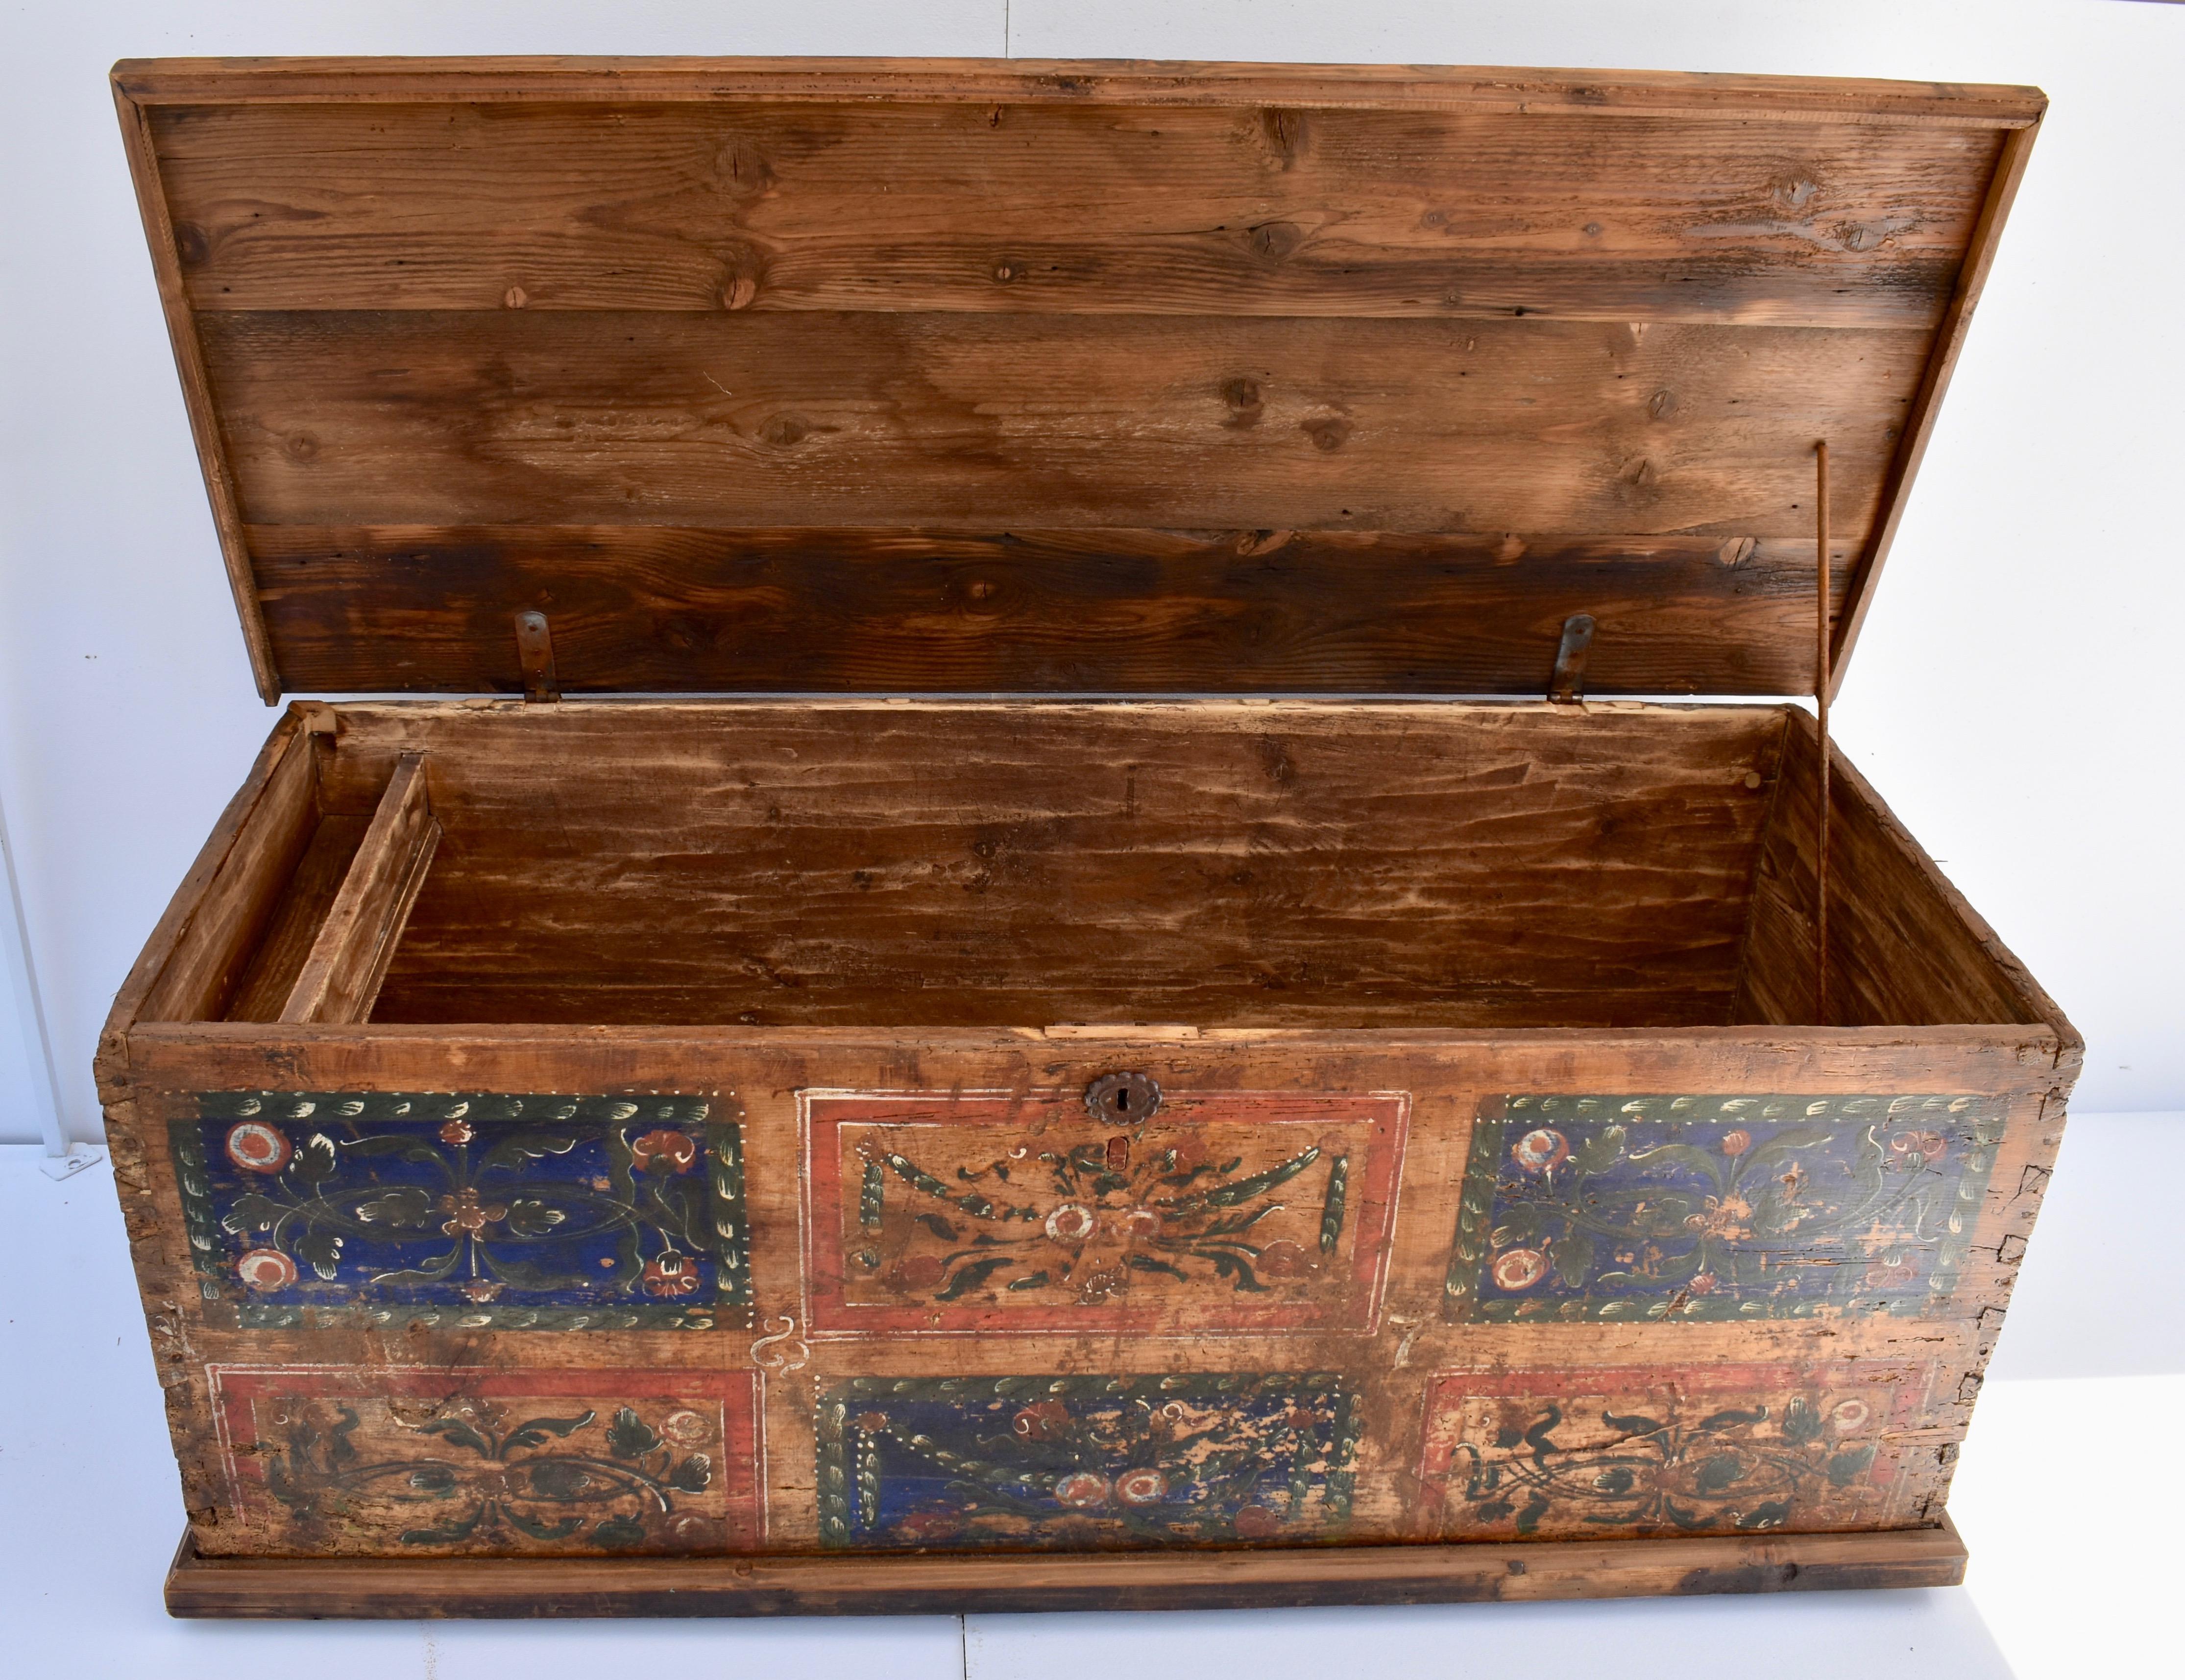 Hand-Painted Large Pine Blanket Chest in Original Paint